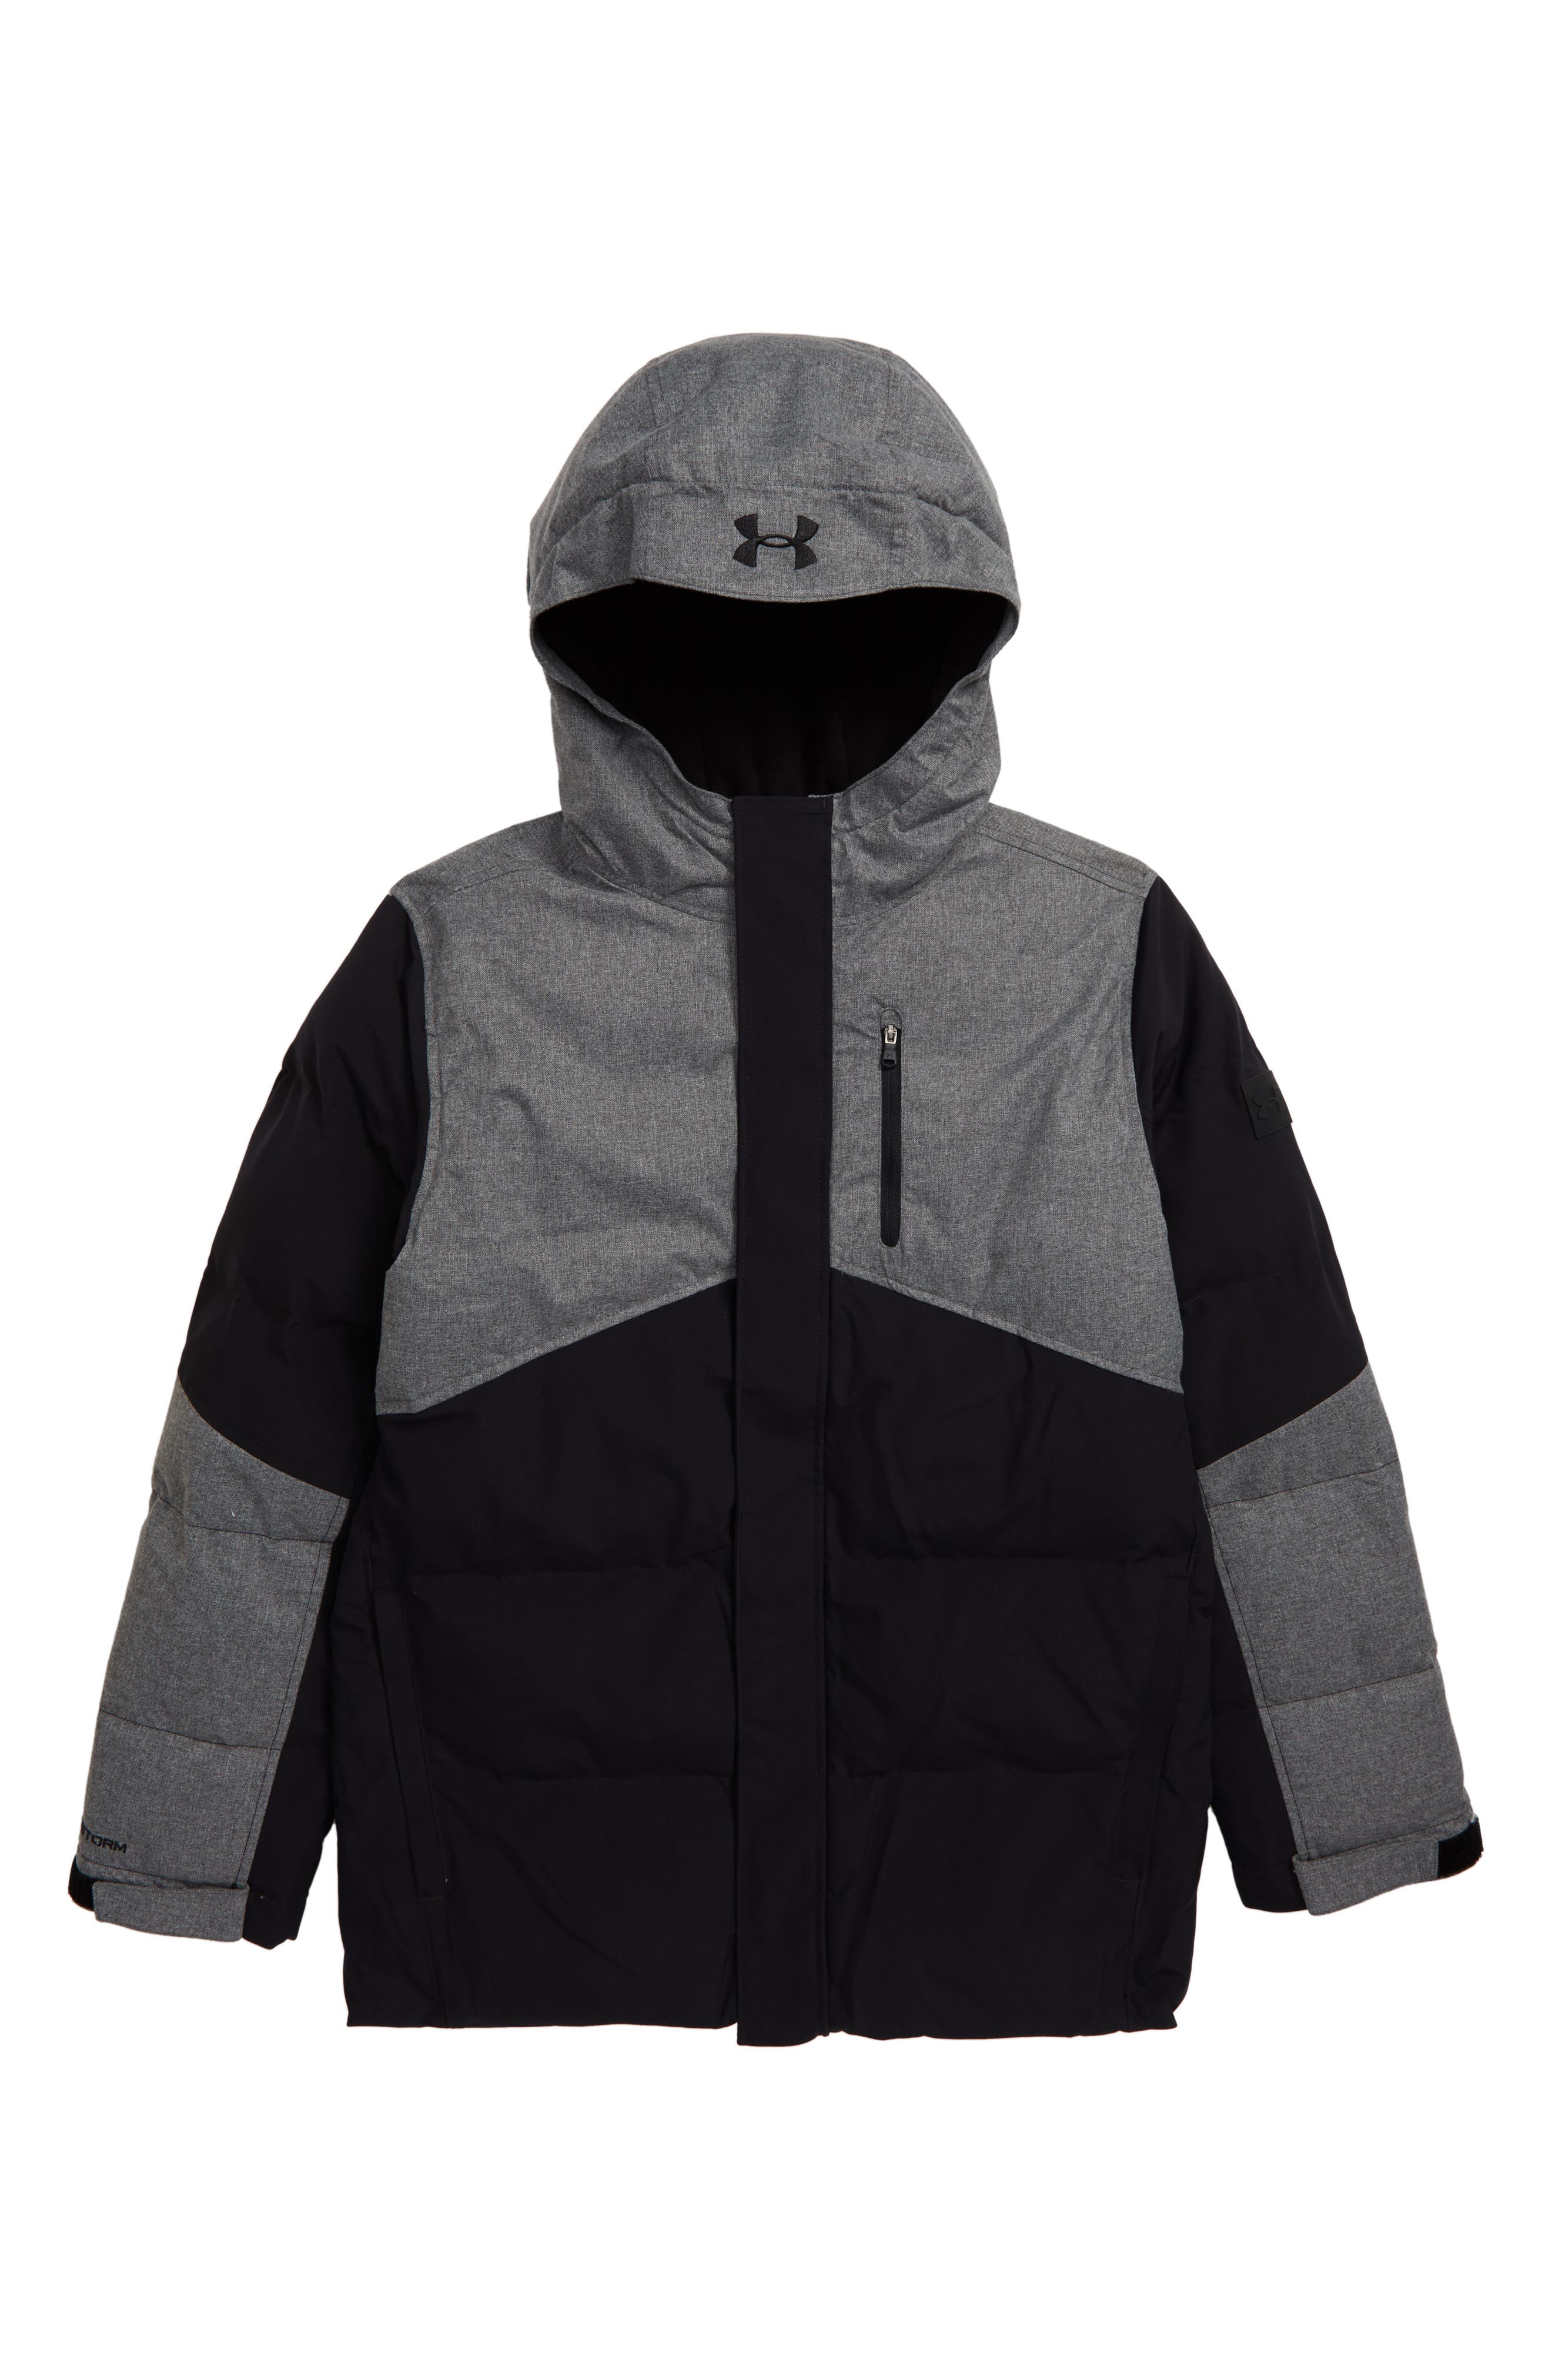 under armour jacket with hood